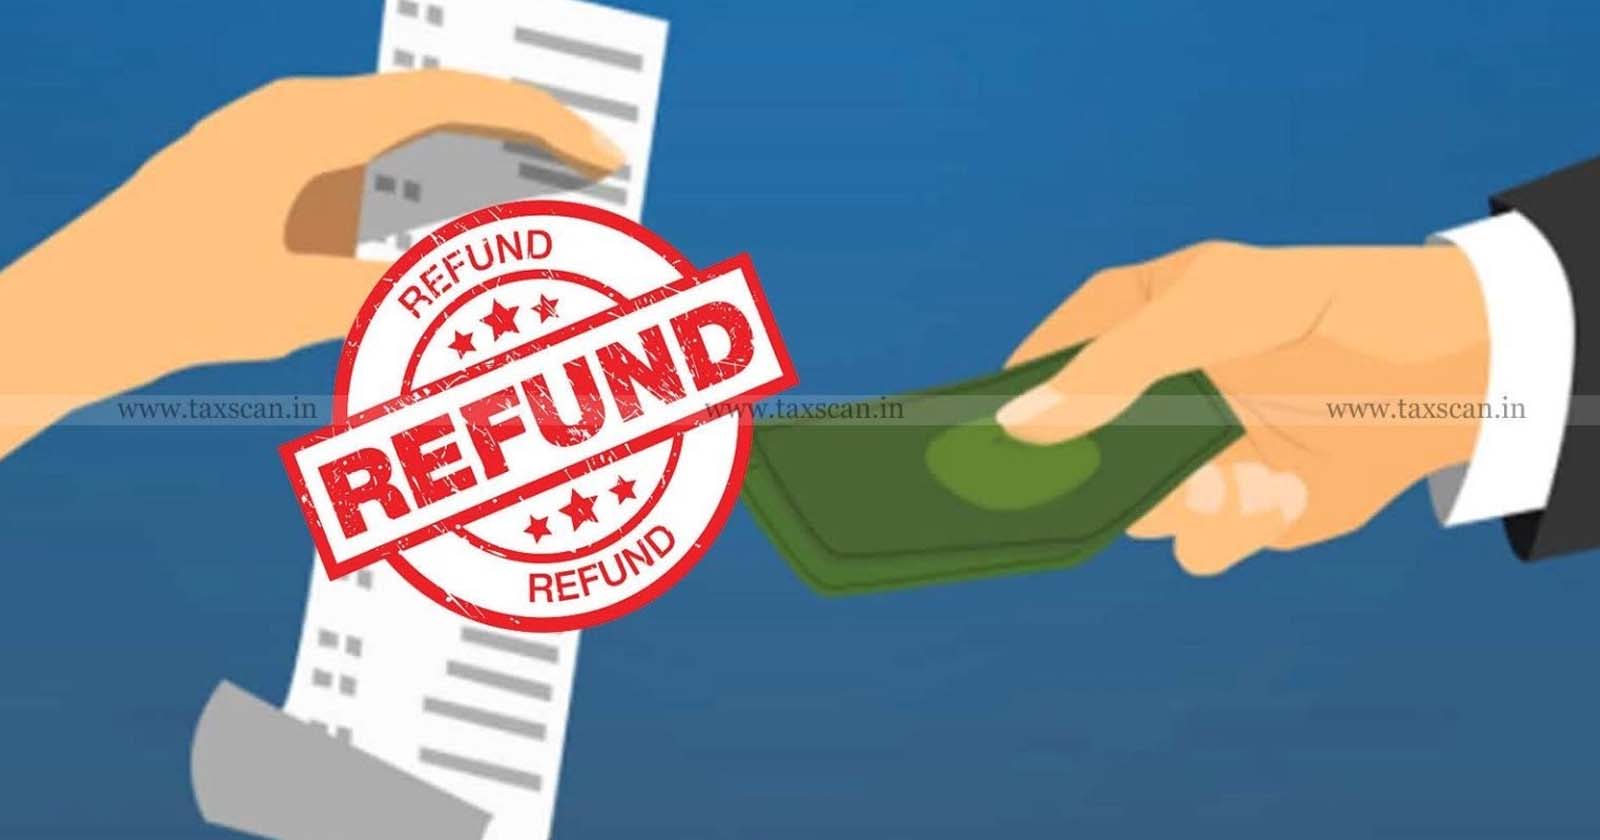 CESTAT Allows Refund Claim -CESTAT - Paid Service Tax - Refund Claim - Service Rendered and Received Outside India - taxscan